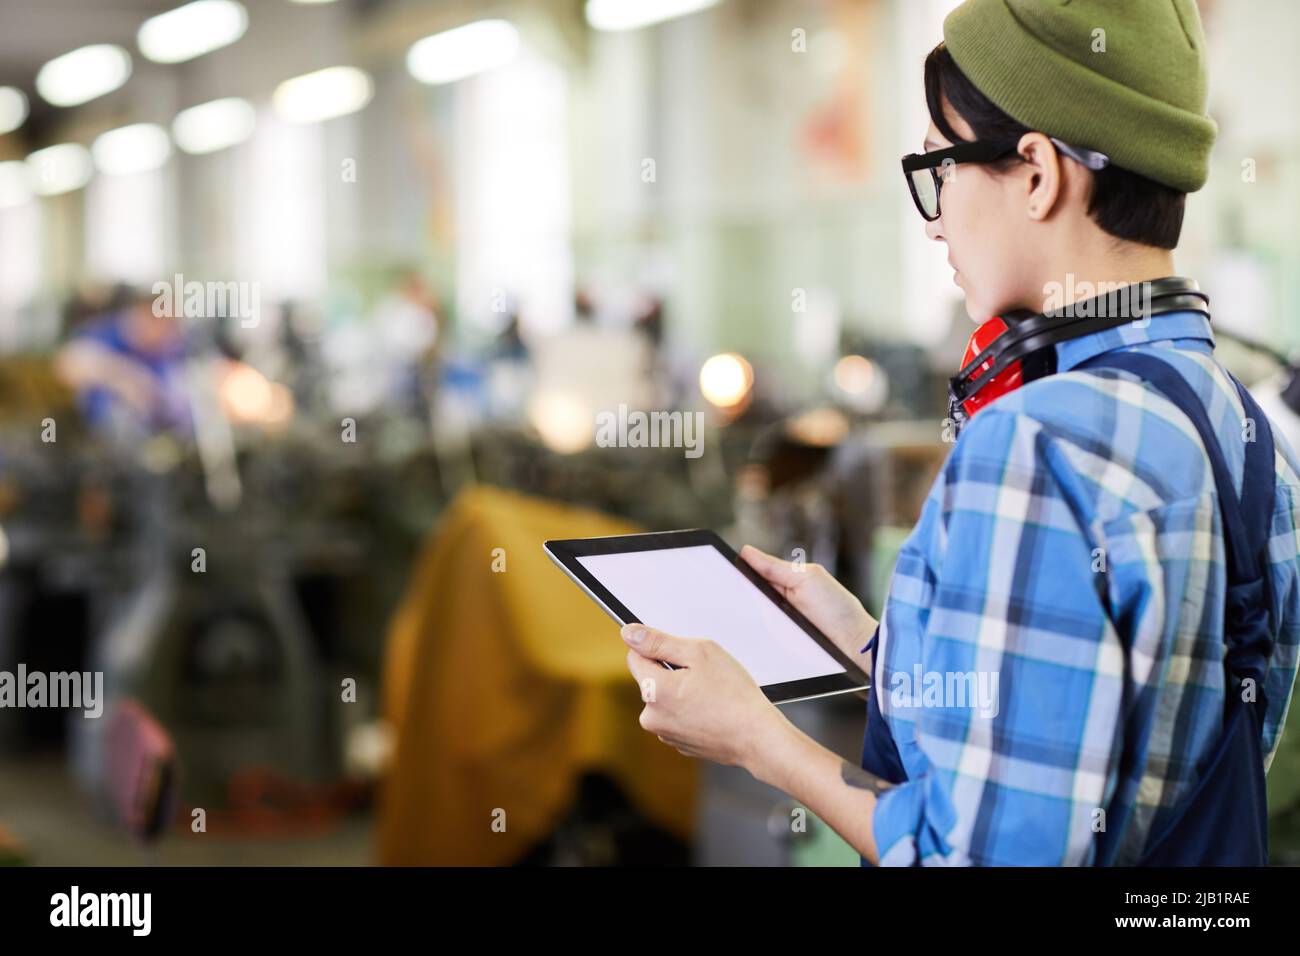 Serious busy lady engineer in hipster hat and glasses standing in industrial shop and using tablet while viewing online notes Stock Photo